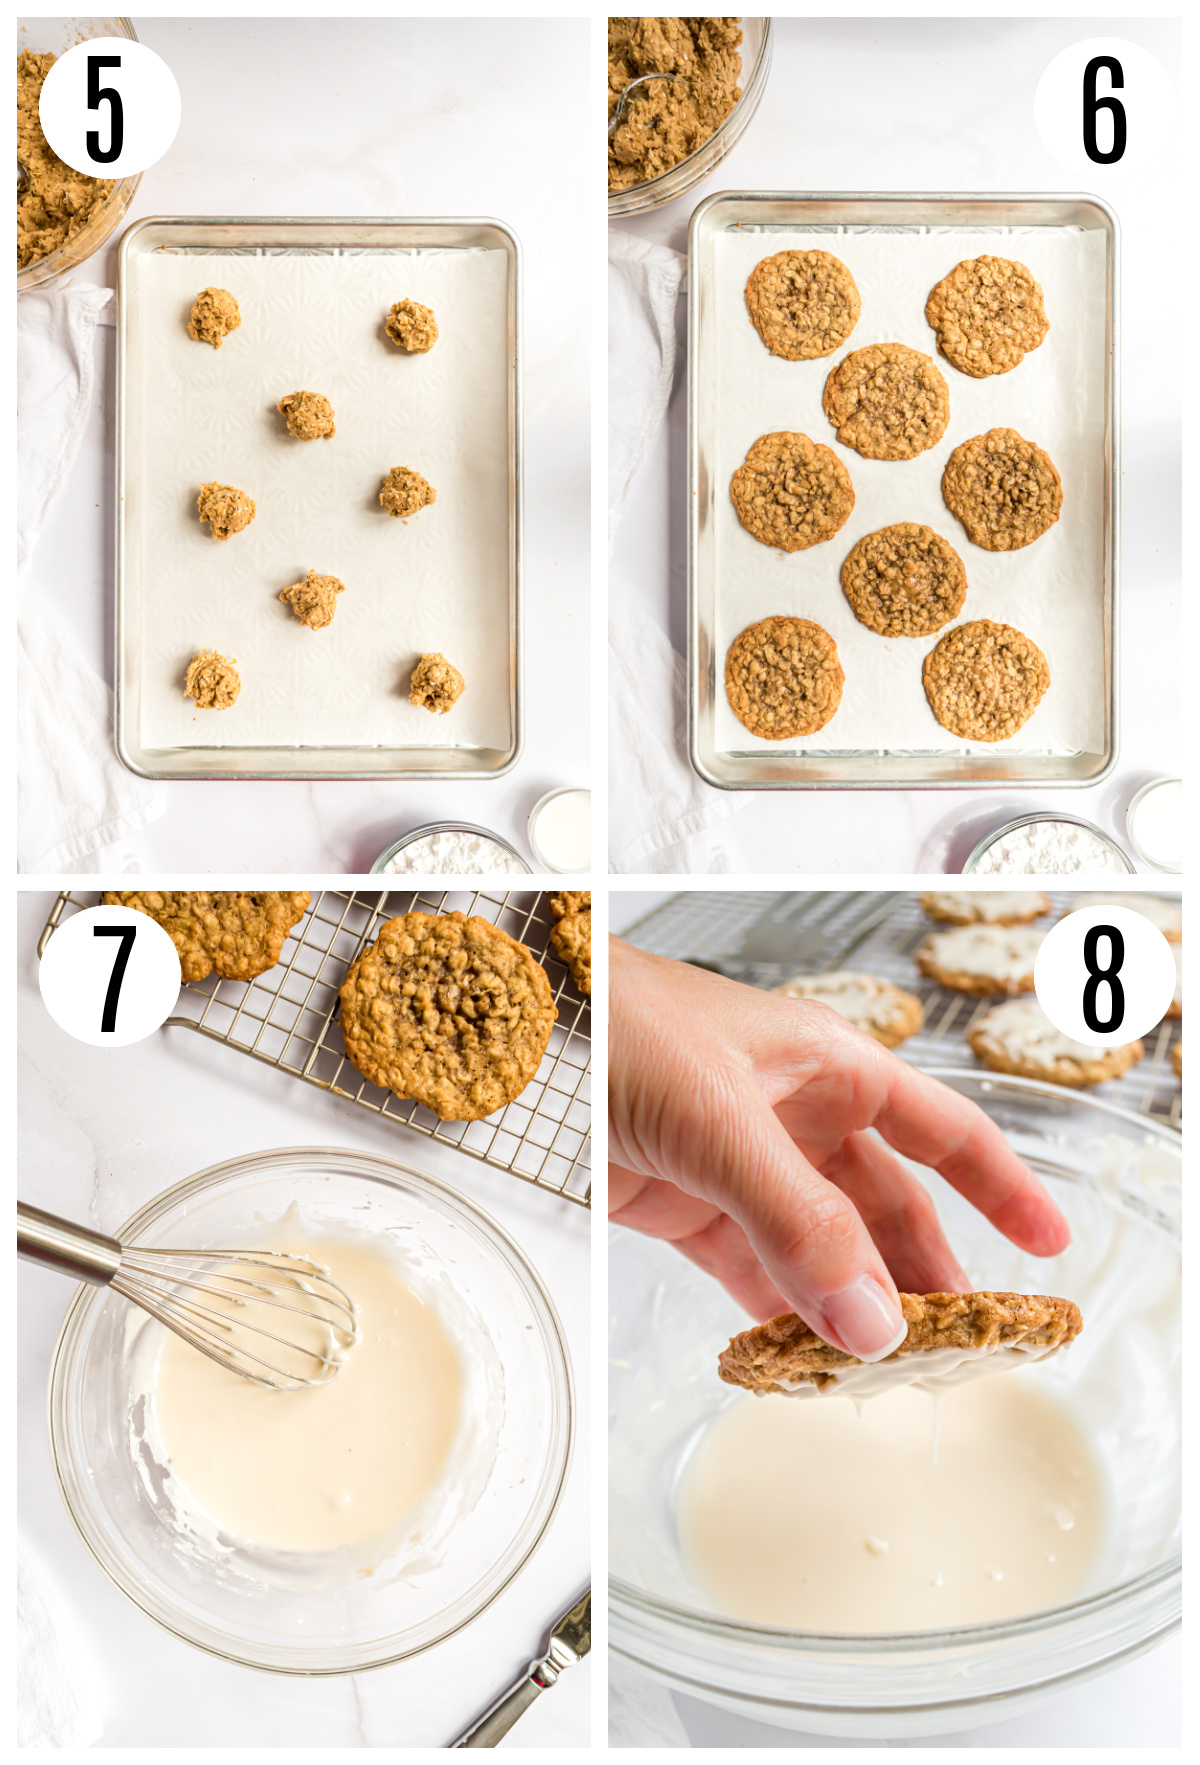 A collage of 4 photos showing the next 4 steps including scooping the cookies onto a baking sheet, baking and cooling the cookies, making the icing and dipping the cookies.